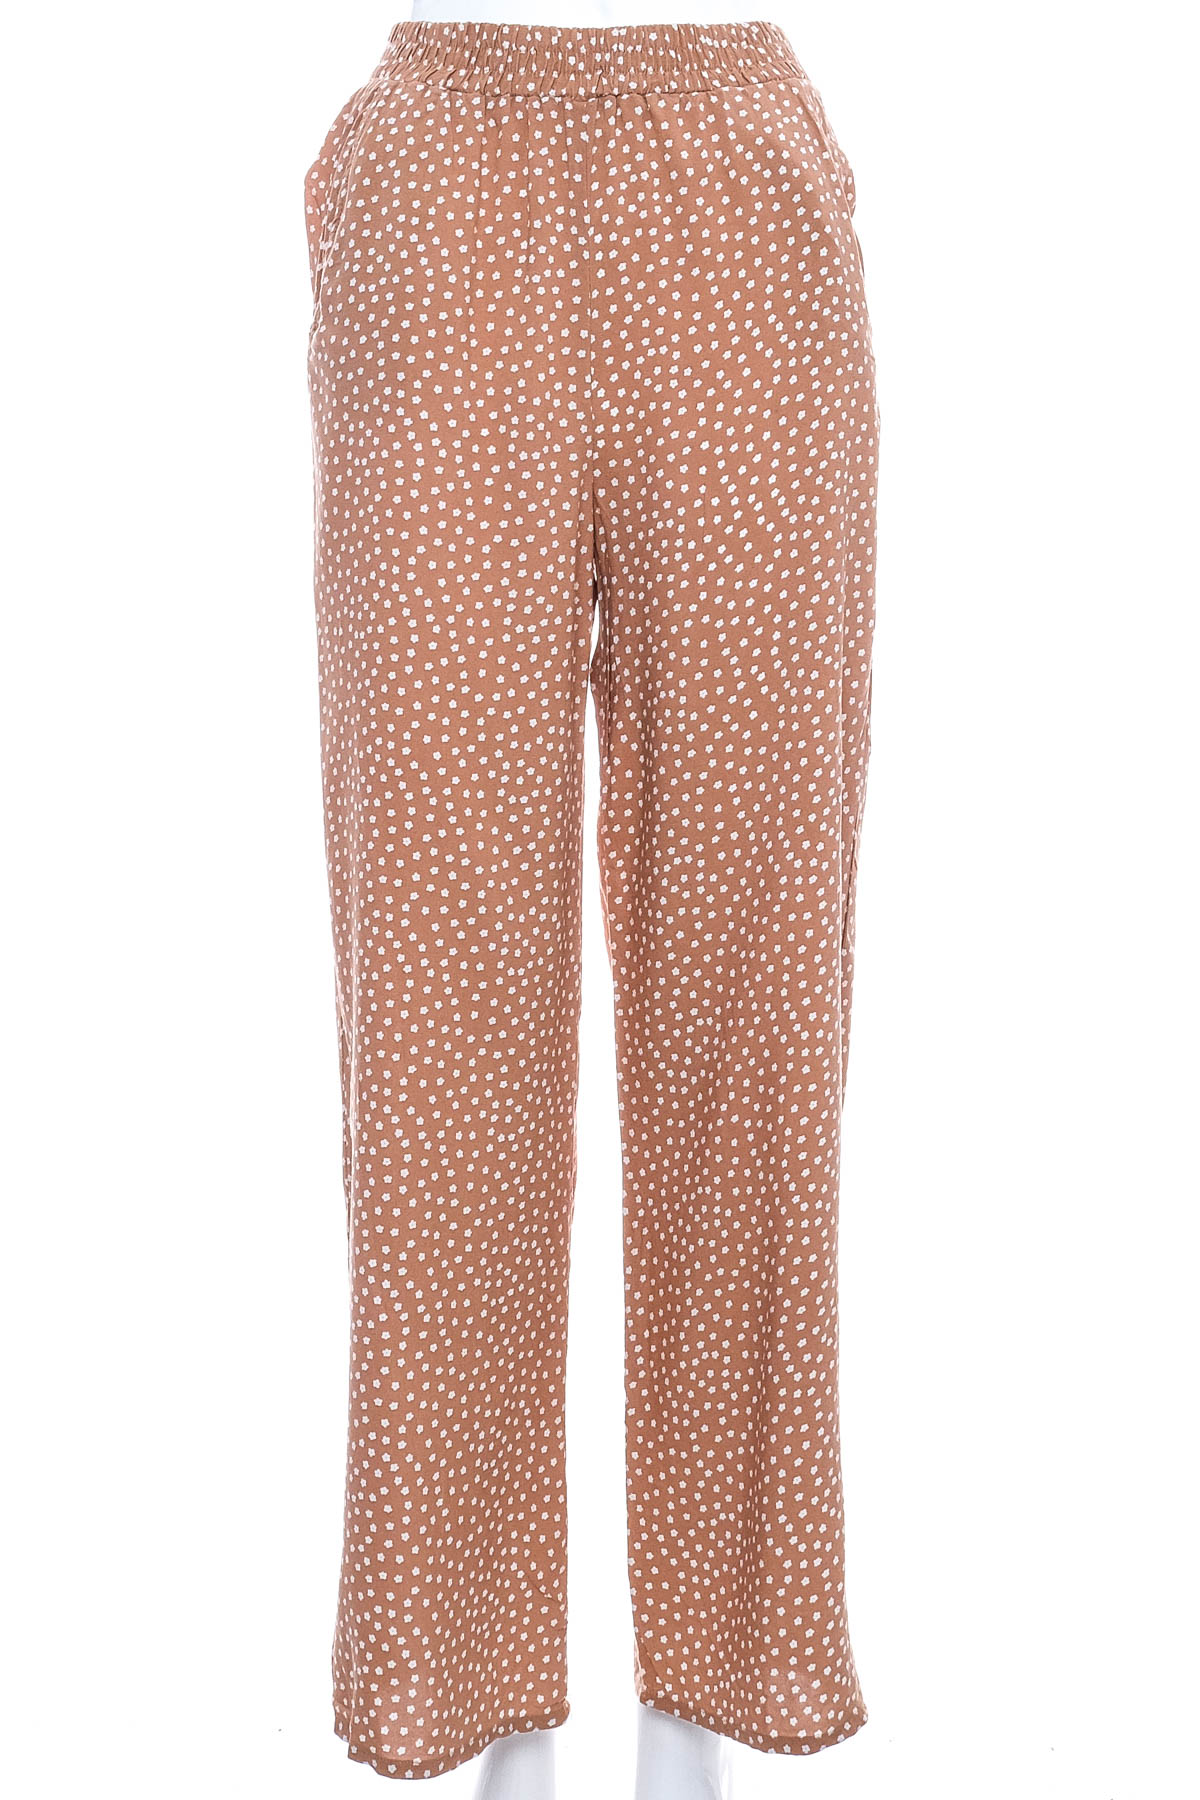 Trousers for girl - H&M - 0